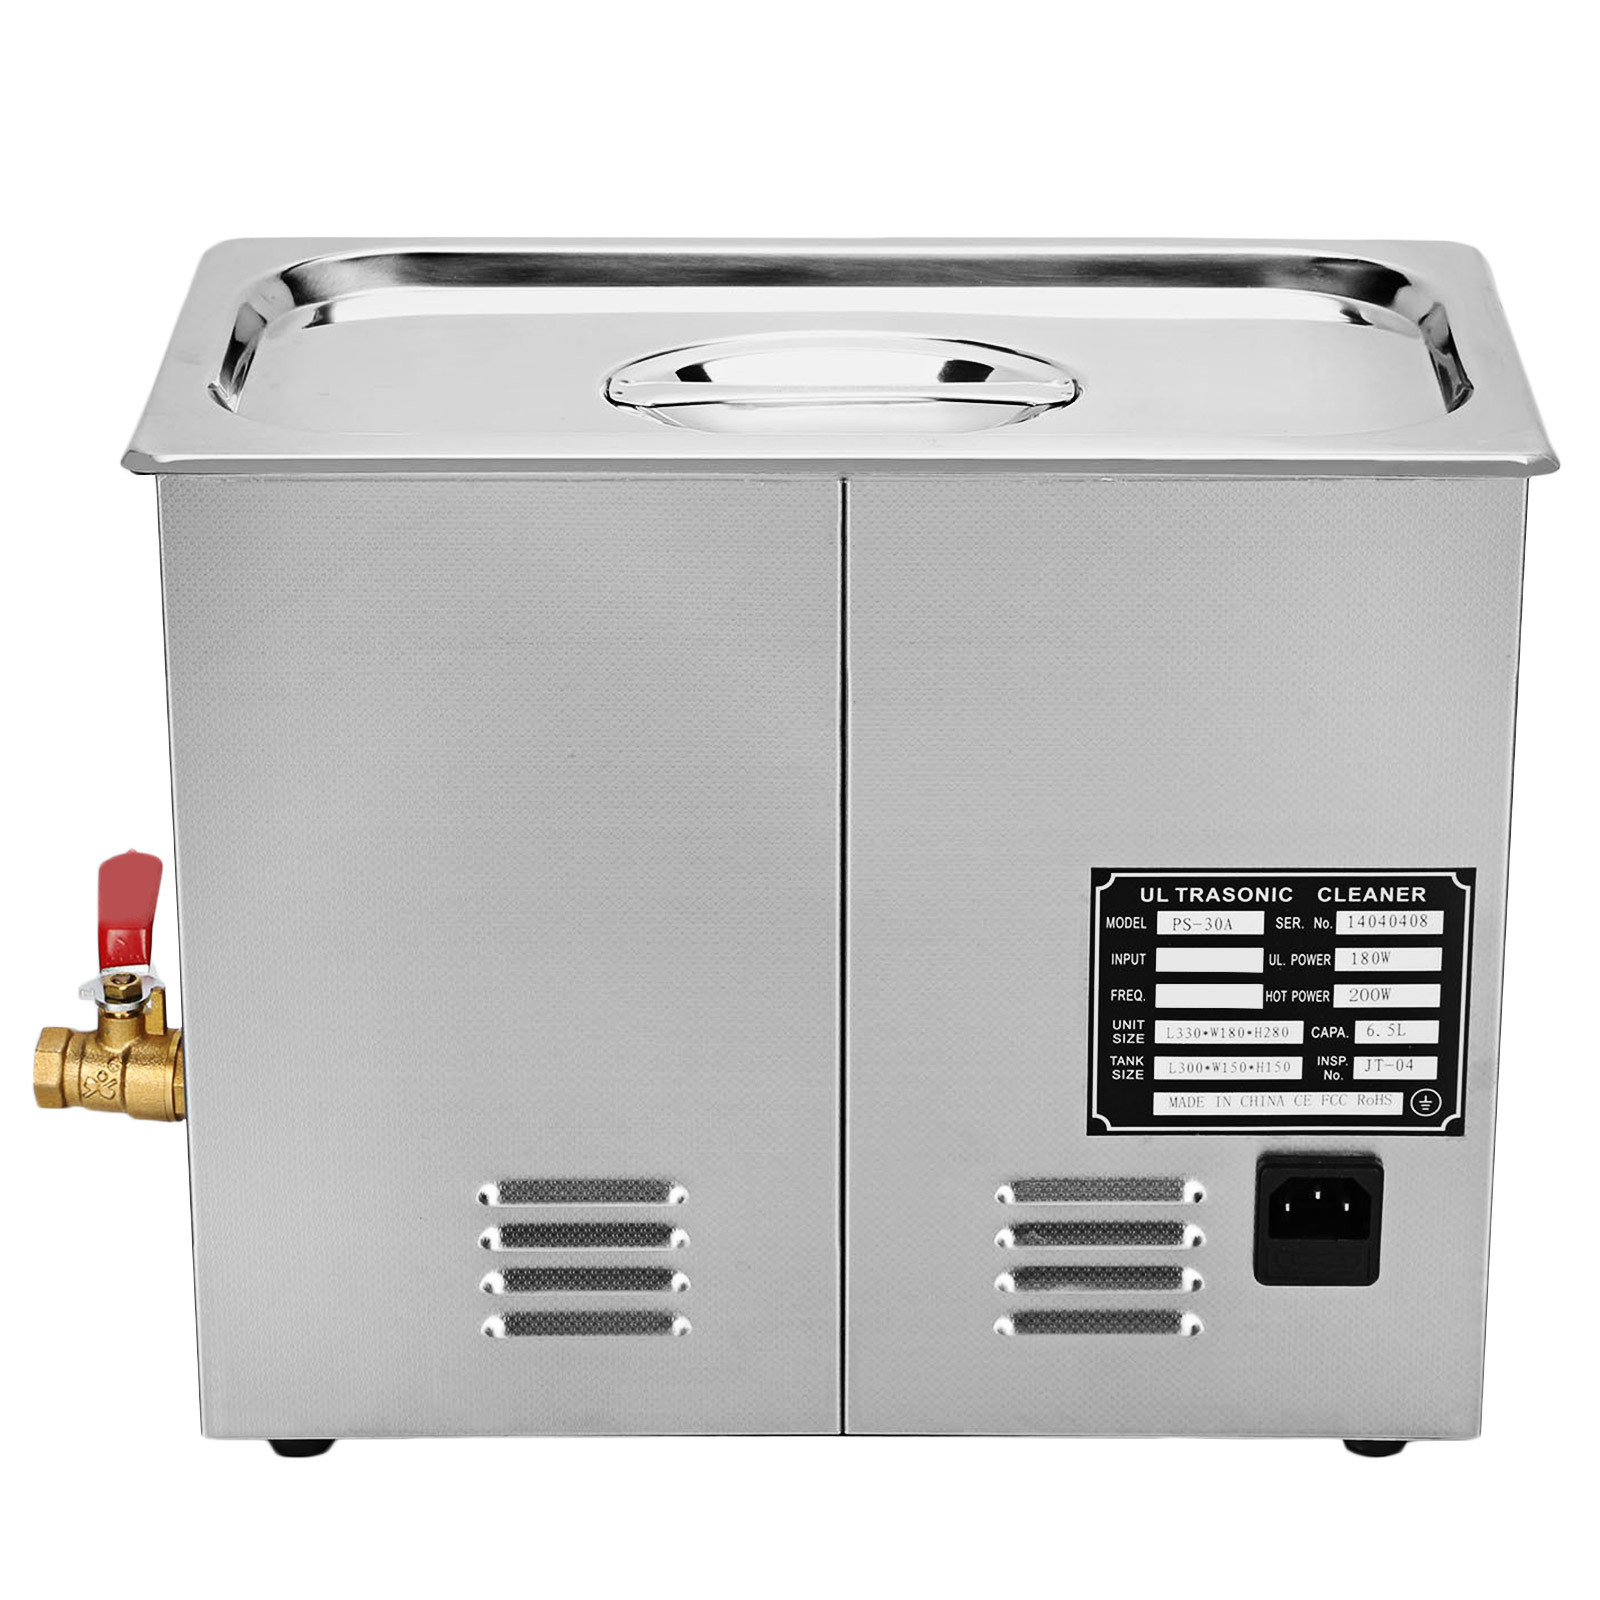 VEVOR Digital Ultrasonic Cleaner 6L Ultrasonic Cleaning Machine 50kHz 110V  Sonic Cleaner Machine 304 Stainless Steel Ultrasonic Cleaner Machine with  Heater & Timer for Cleaning Jewelry Glasses Watches 